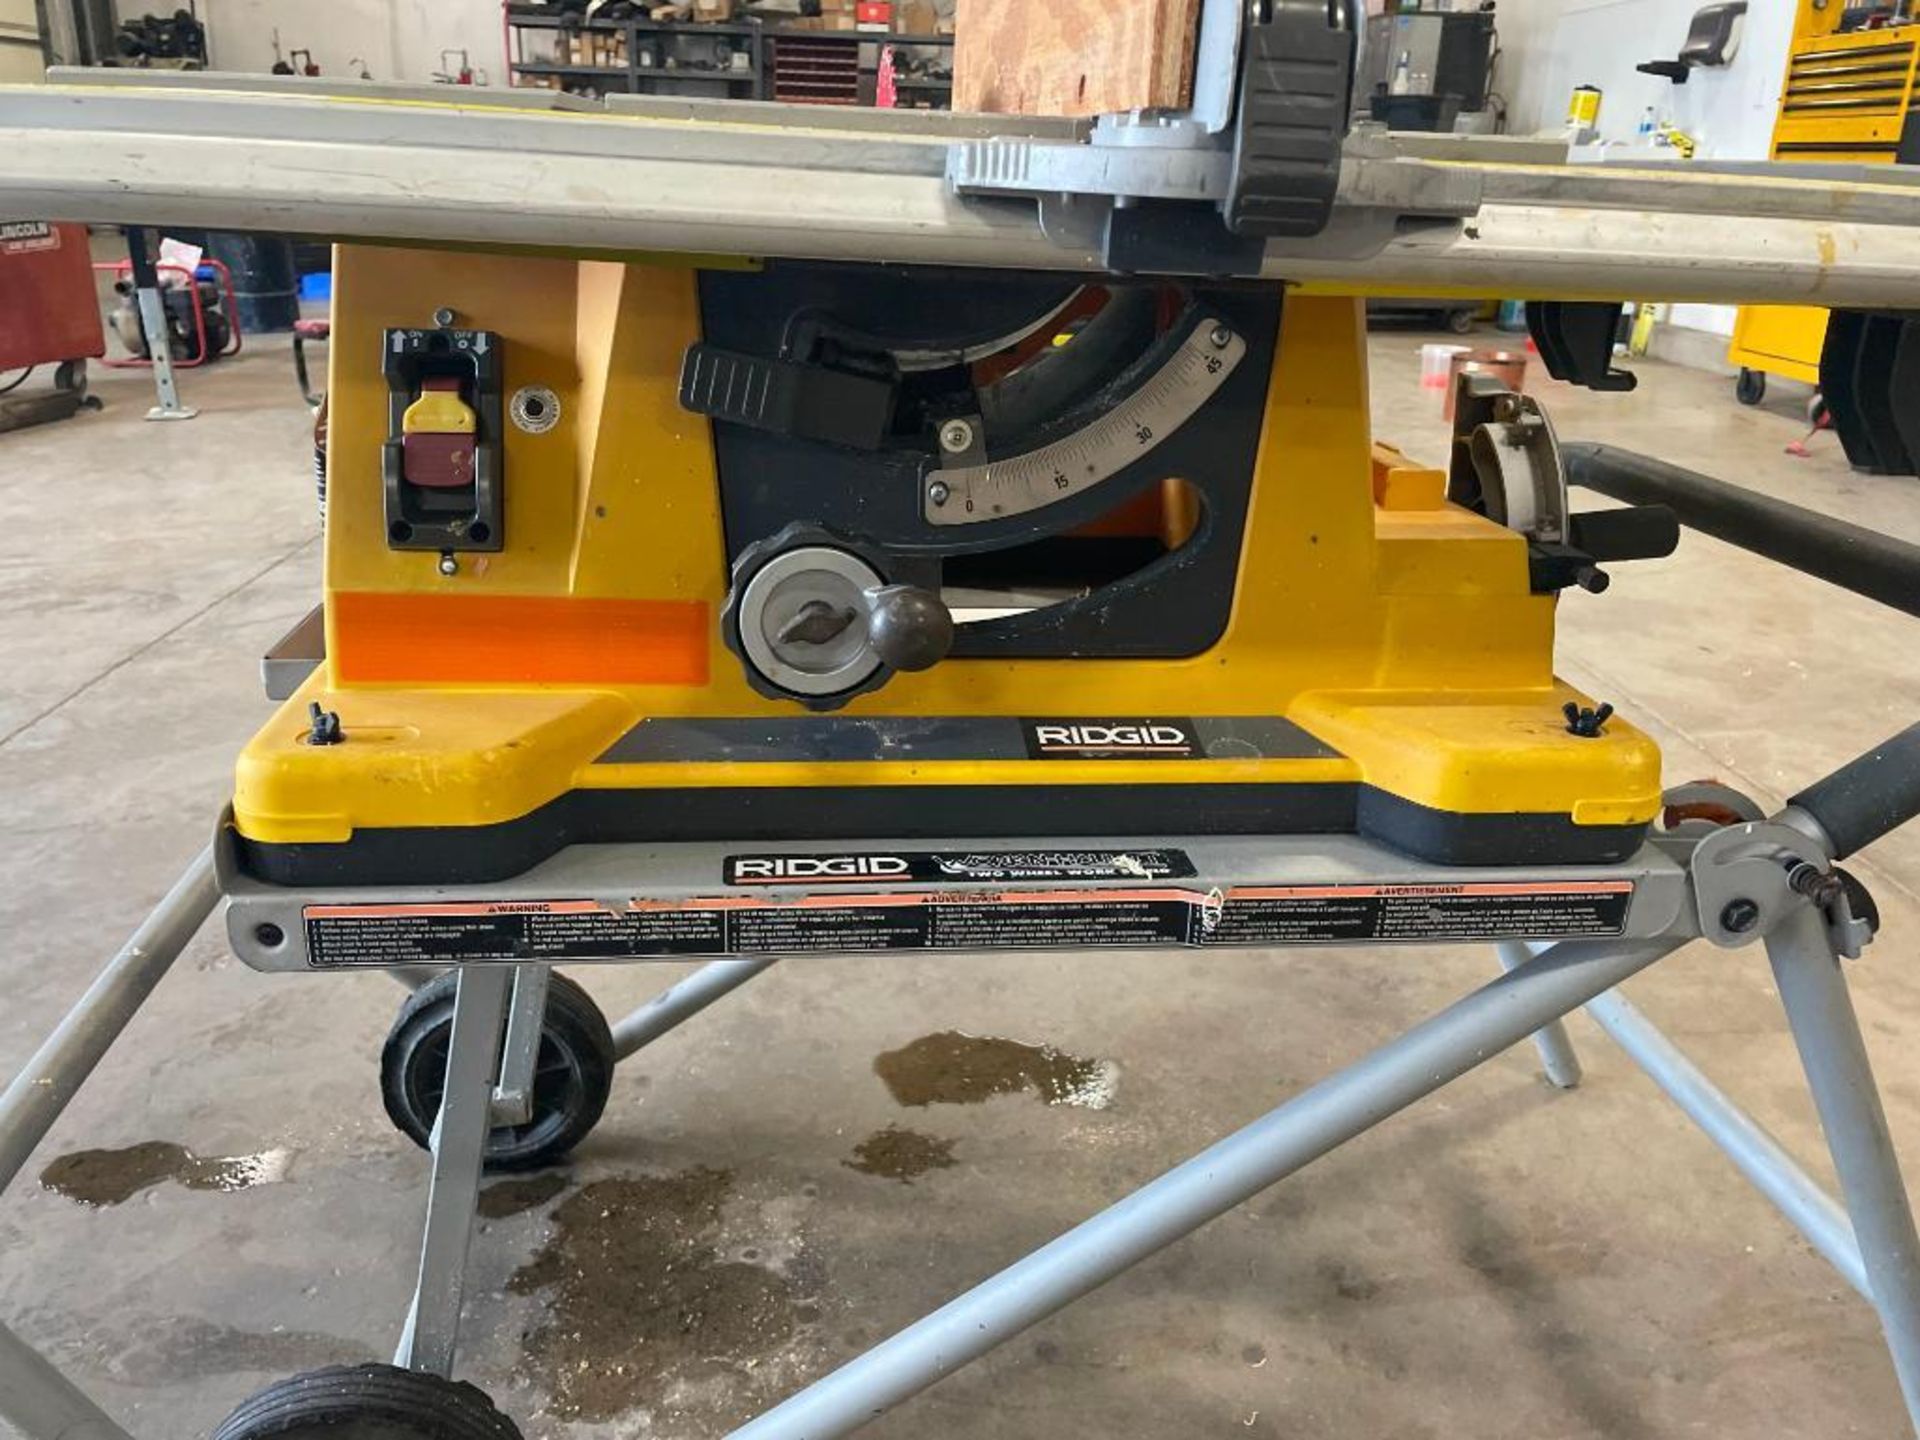 Rigid 10" Tilt Table Saw on Rigid Work-N-Haul-It Two Wheel Work Stand. Located in Hazelwood, MO - Image 2 of 6